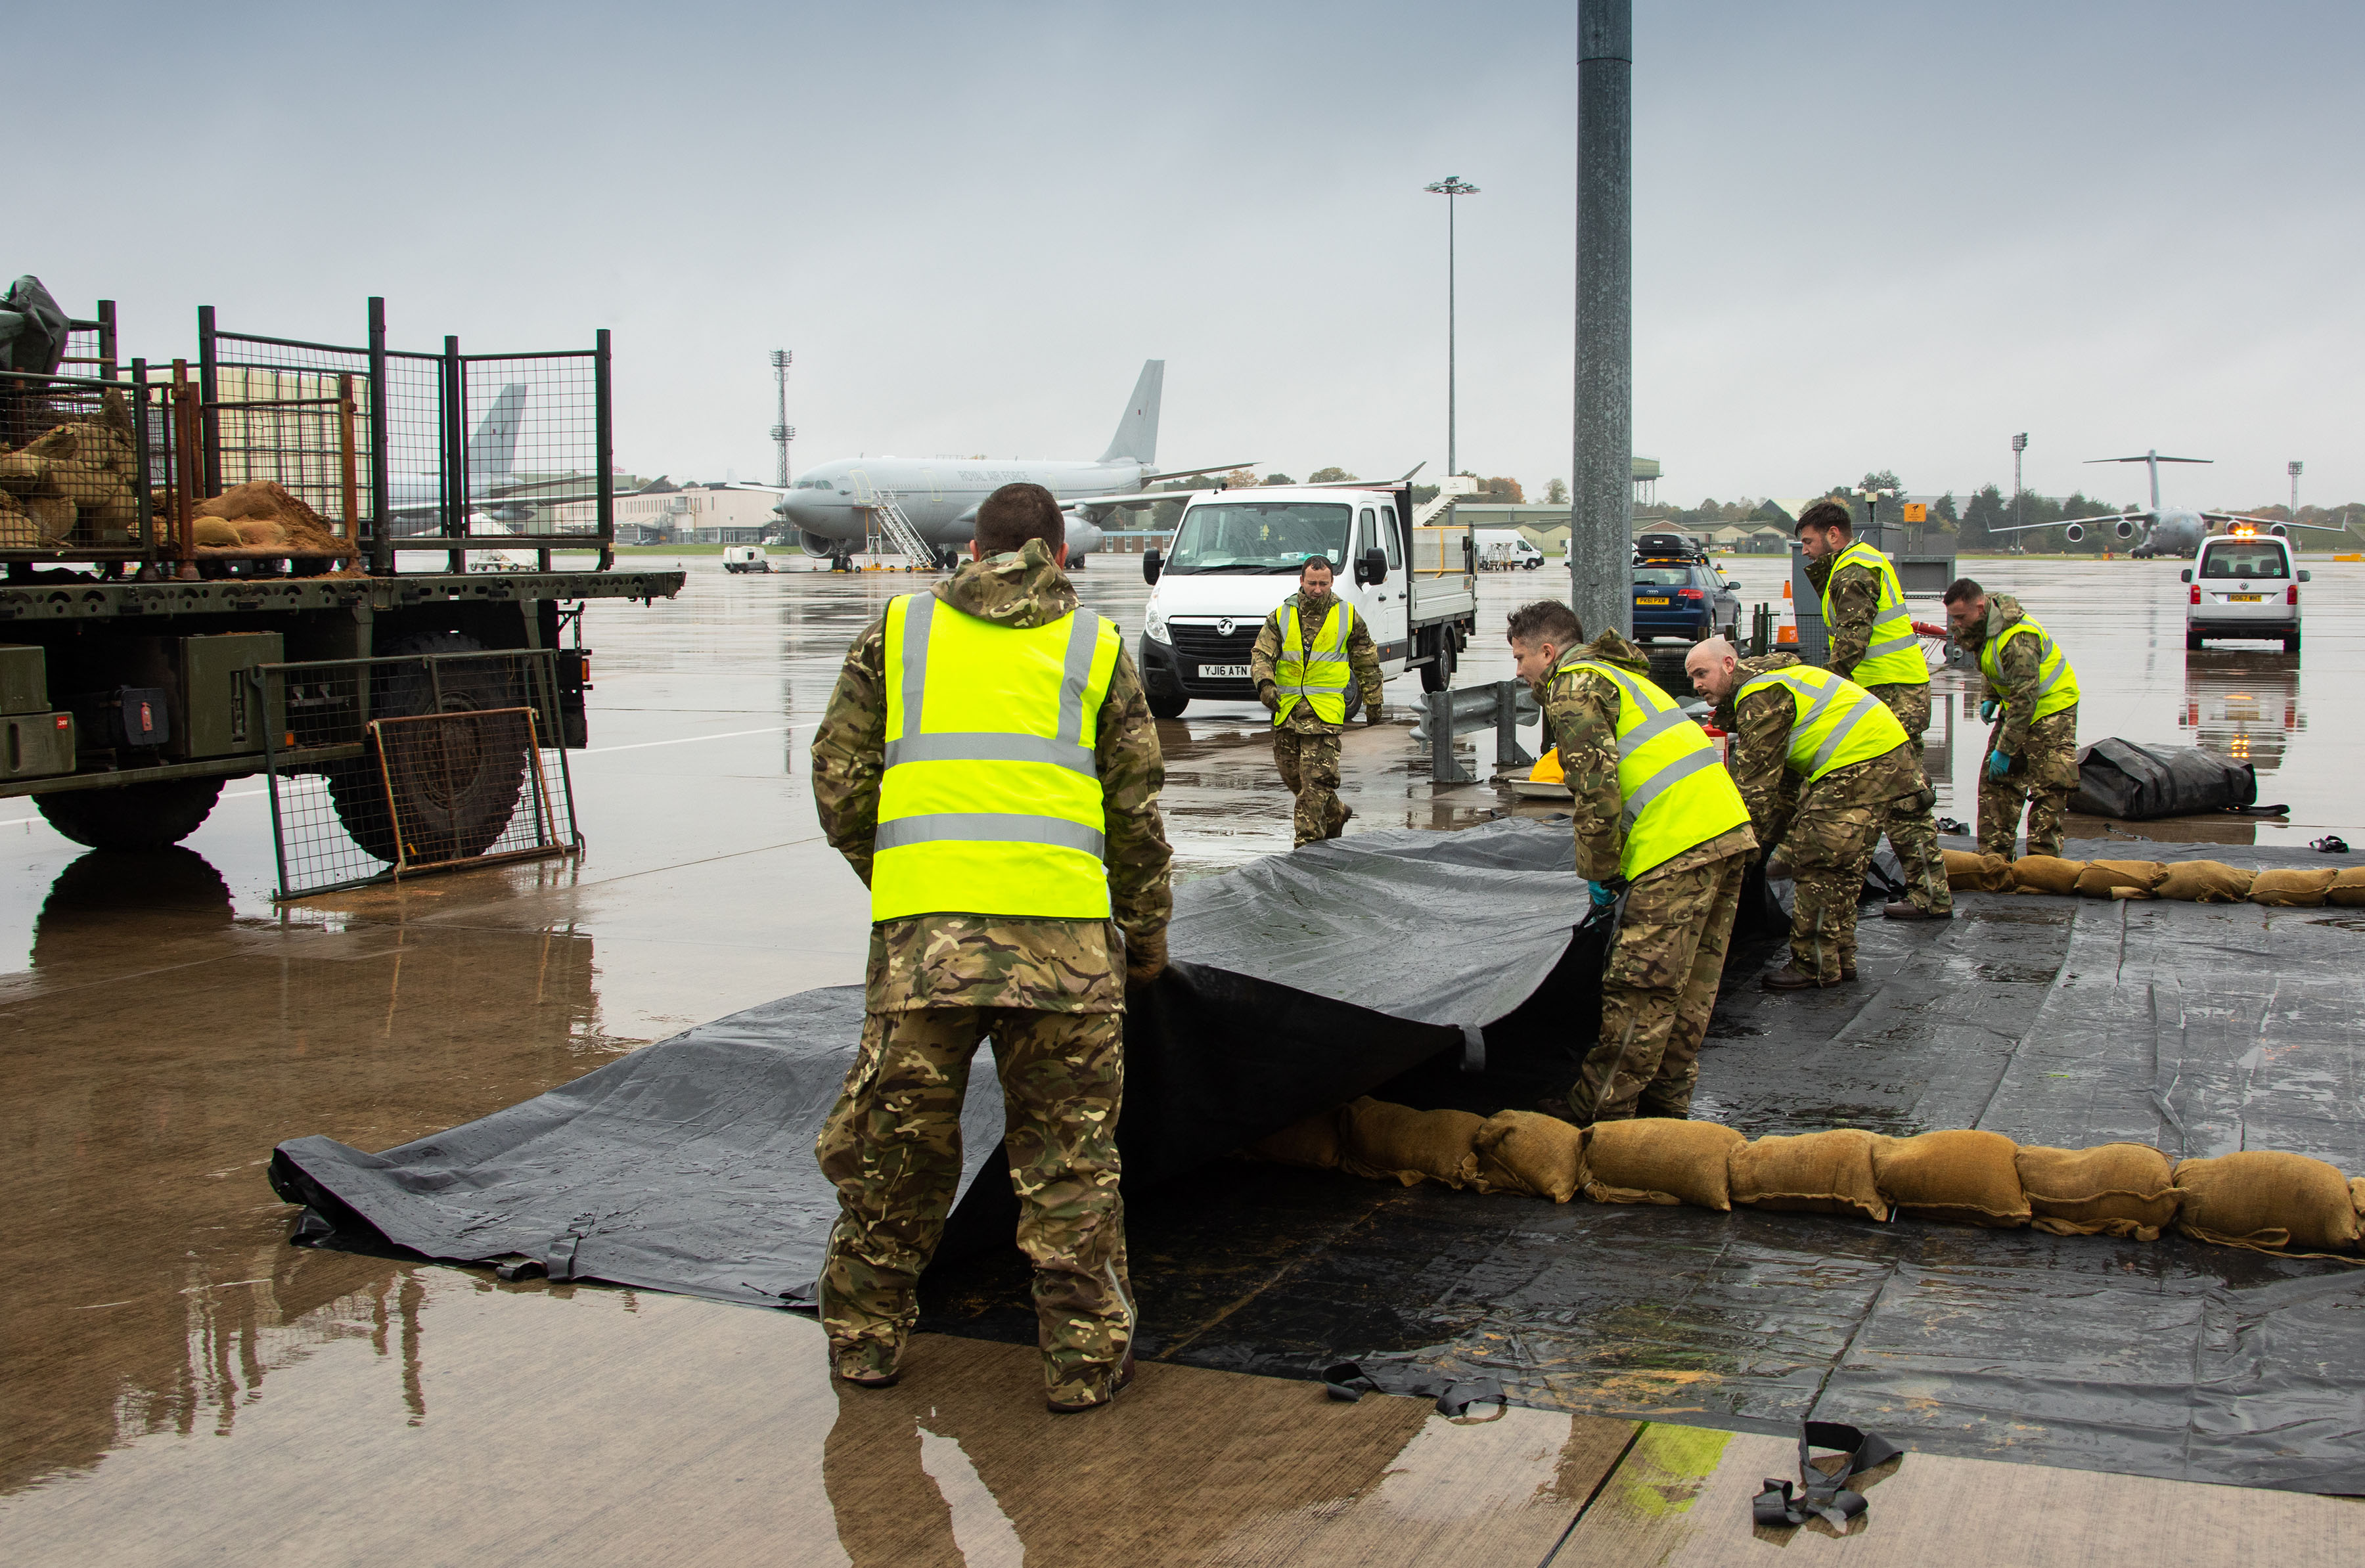 Personnel work with spill kit on the airfield, with vehicles.